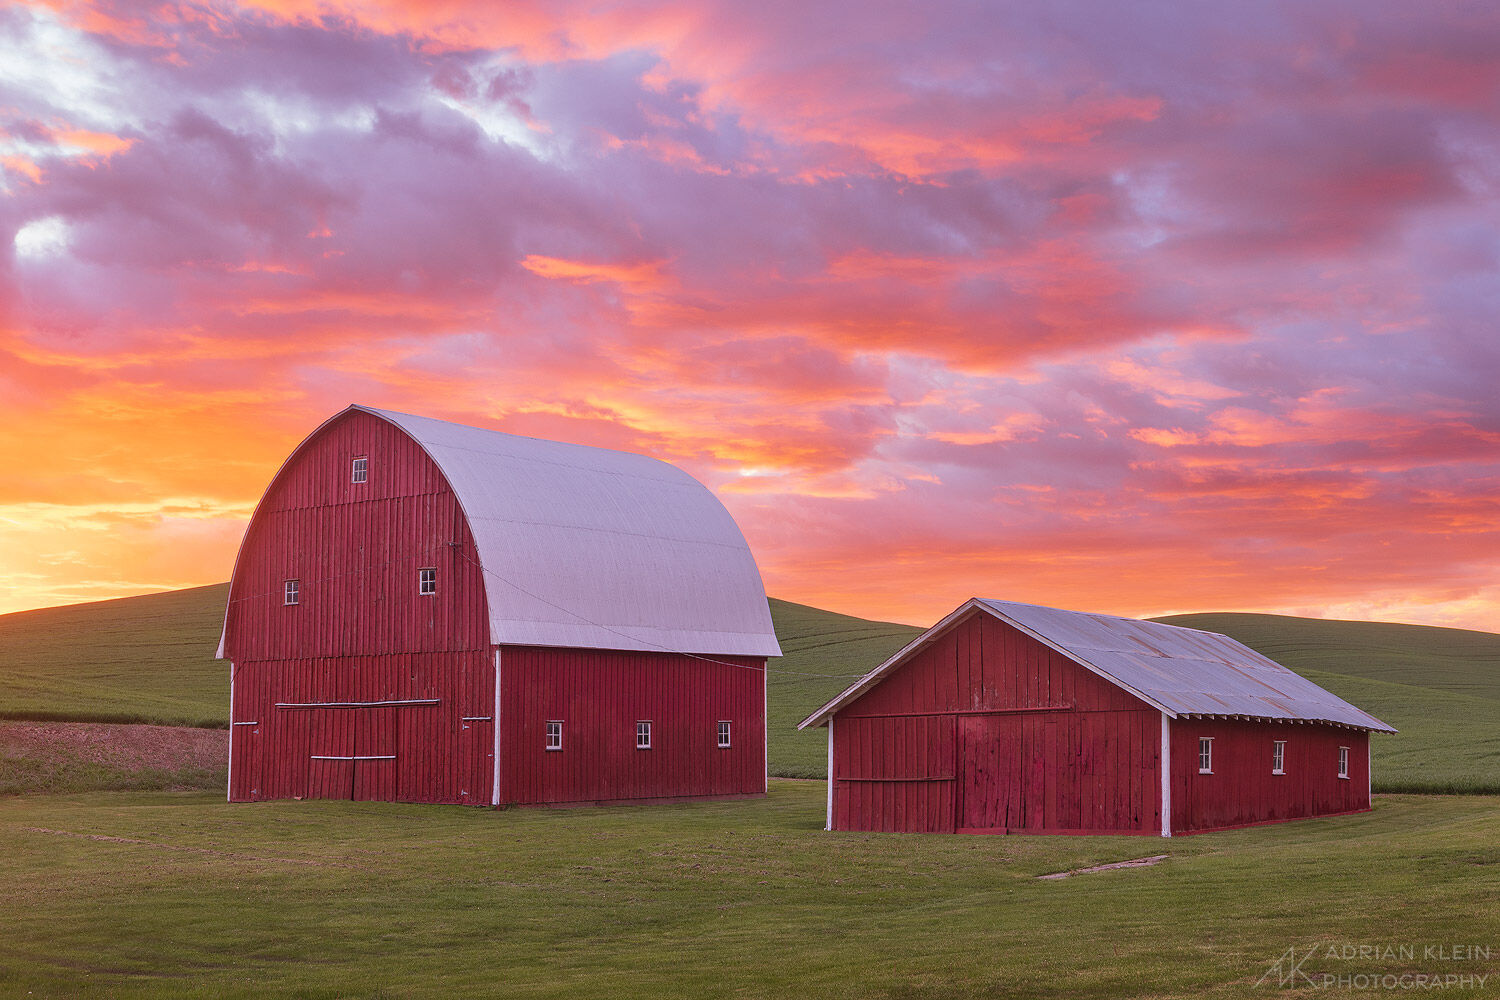 A picturesque red barn and rolling green hills during a very colorful sunset. Eastern Washington in the Palouse Hills region....